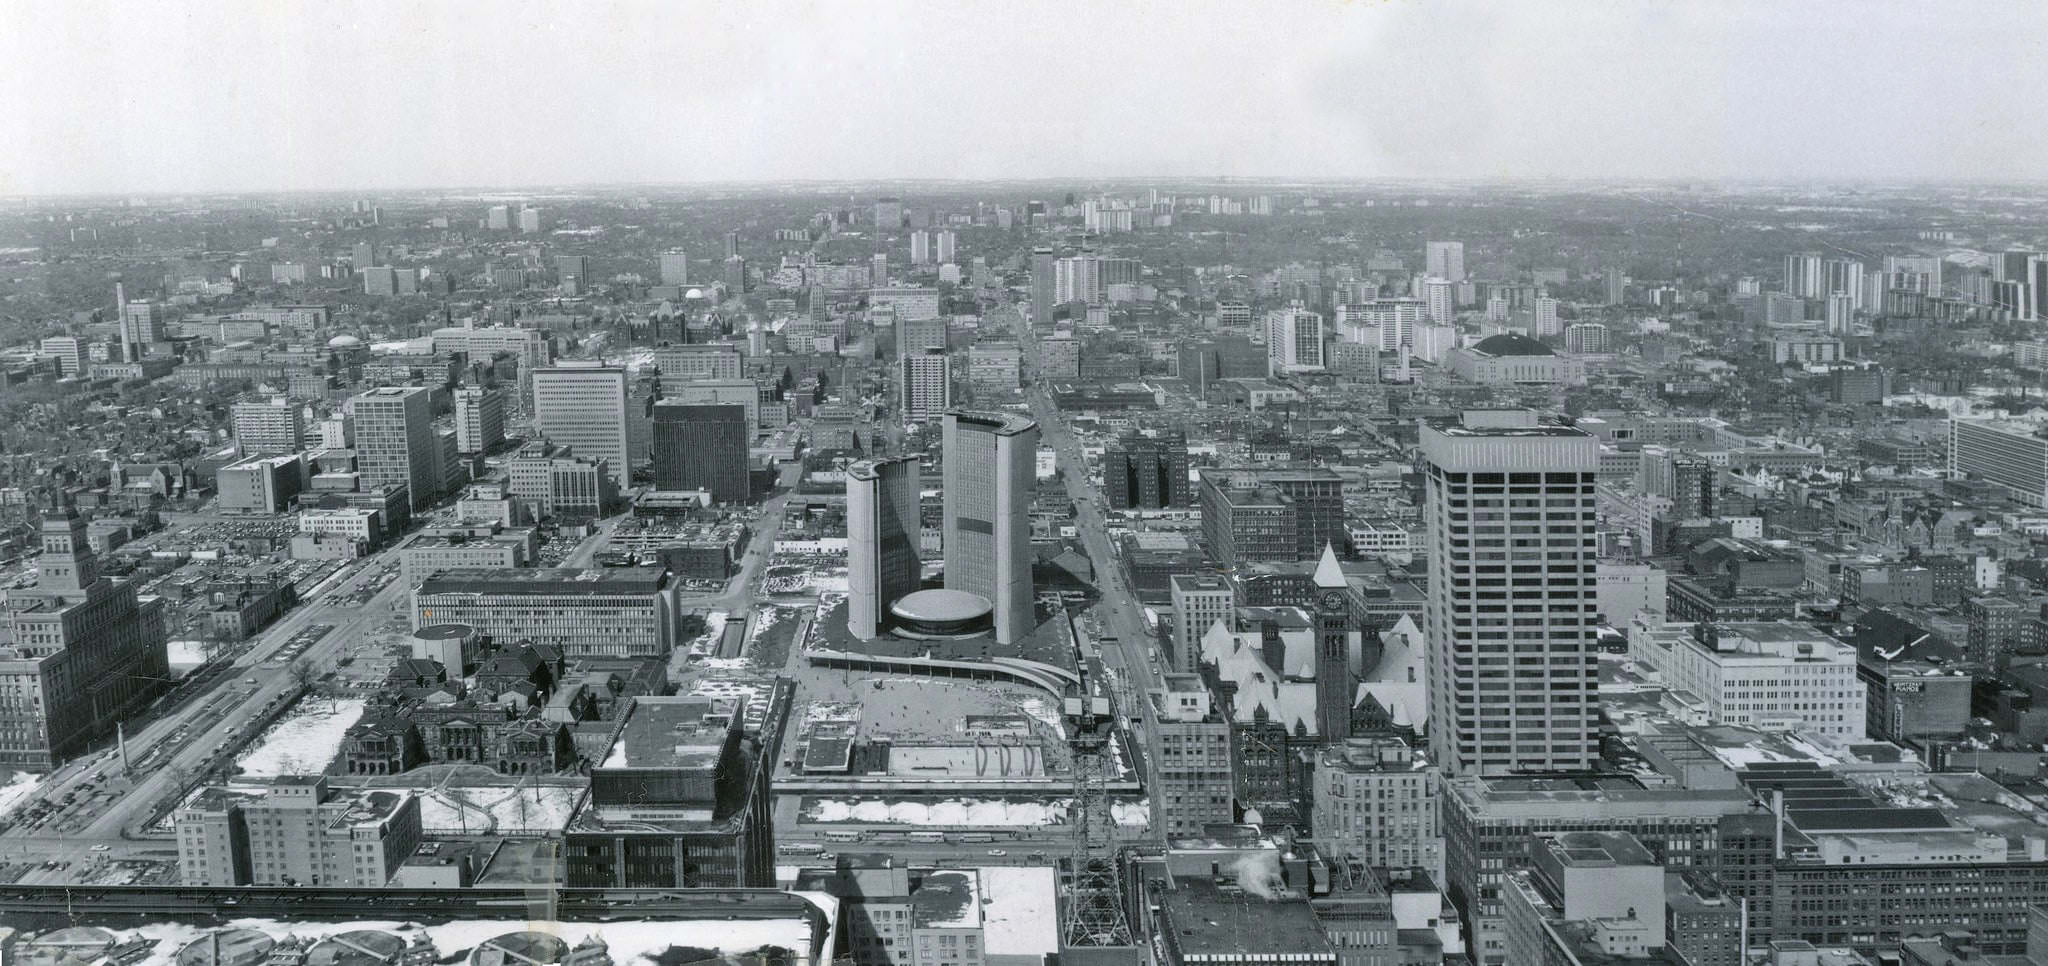 View looking north over City Hall, taken from the top of the TD Centre’s then recently-completed main tower, 1960s